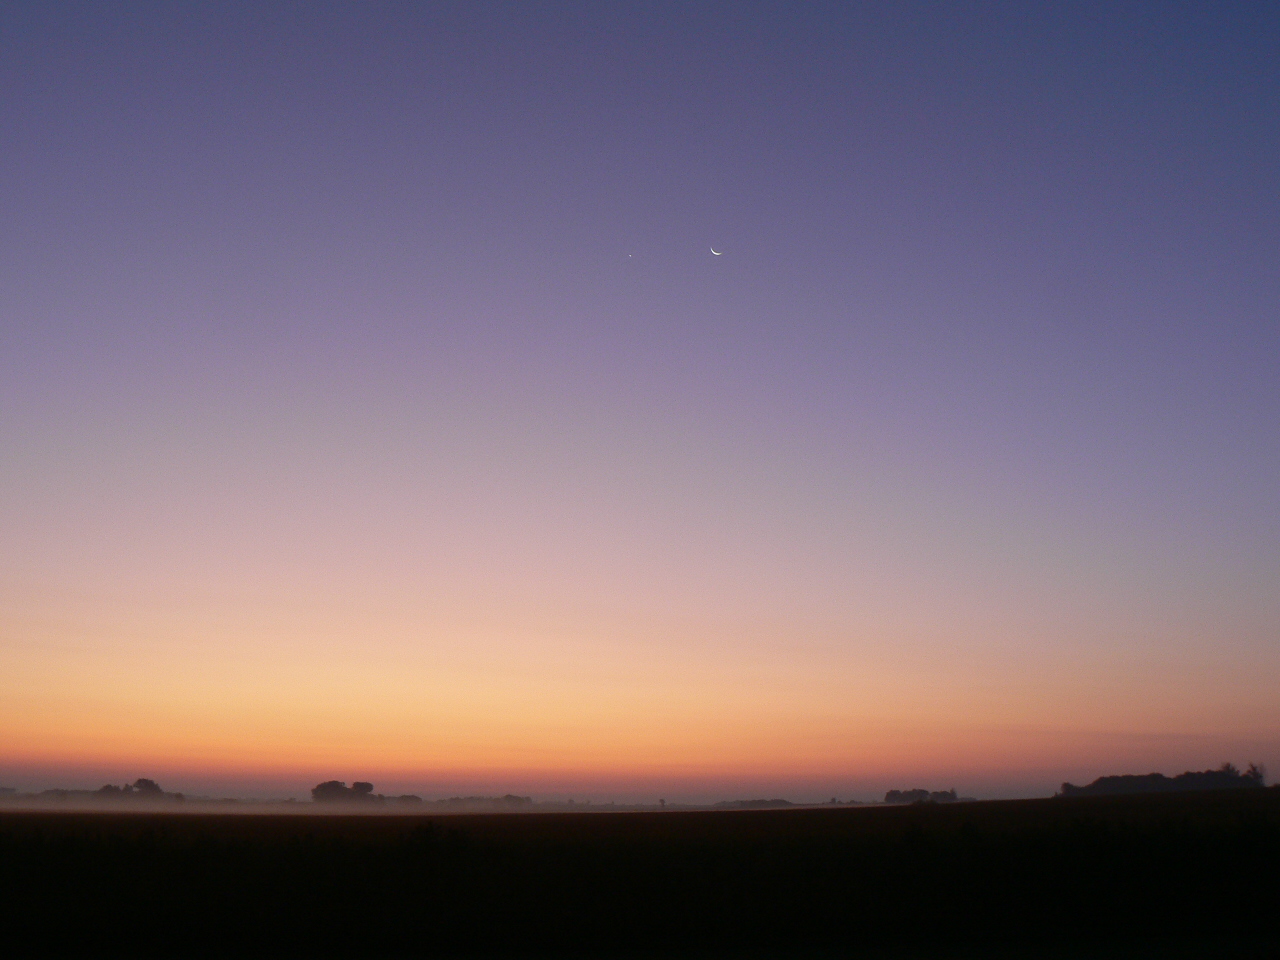 Venus/crescent moon conjunction and morning fog at sunrise.